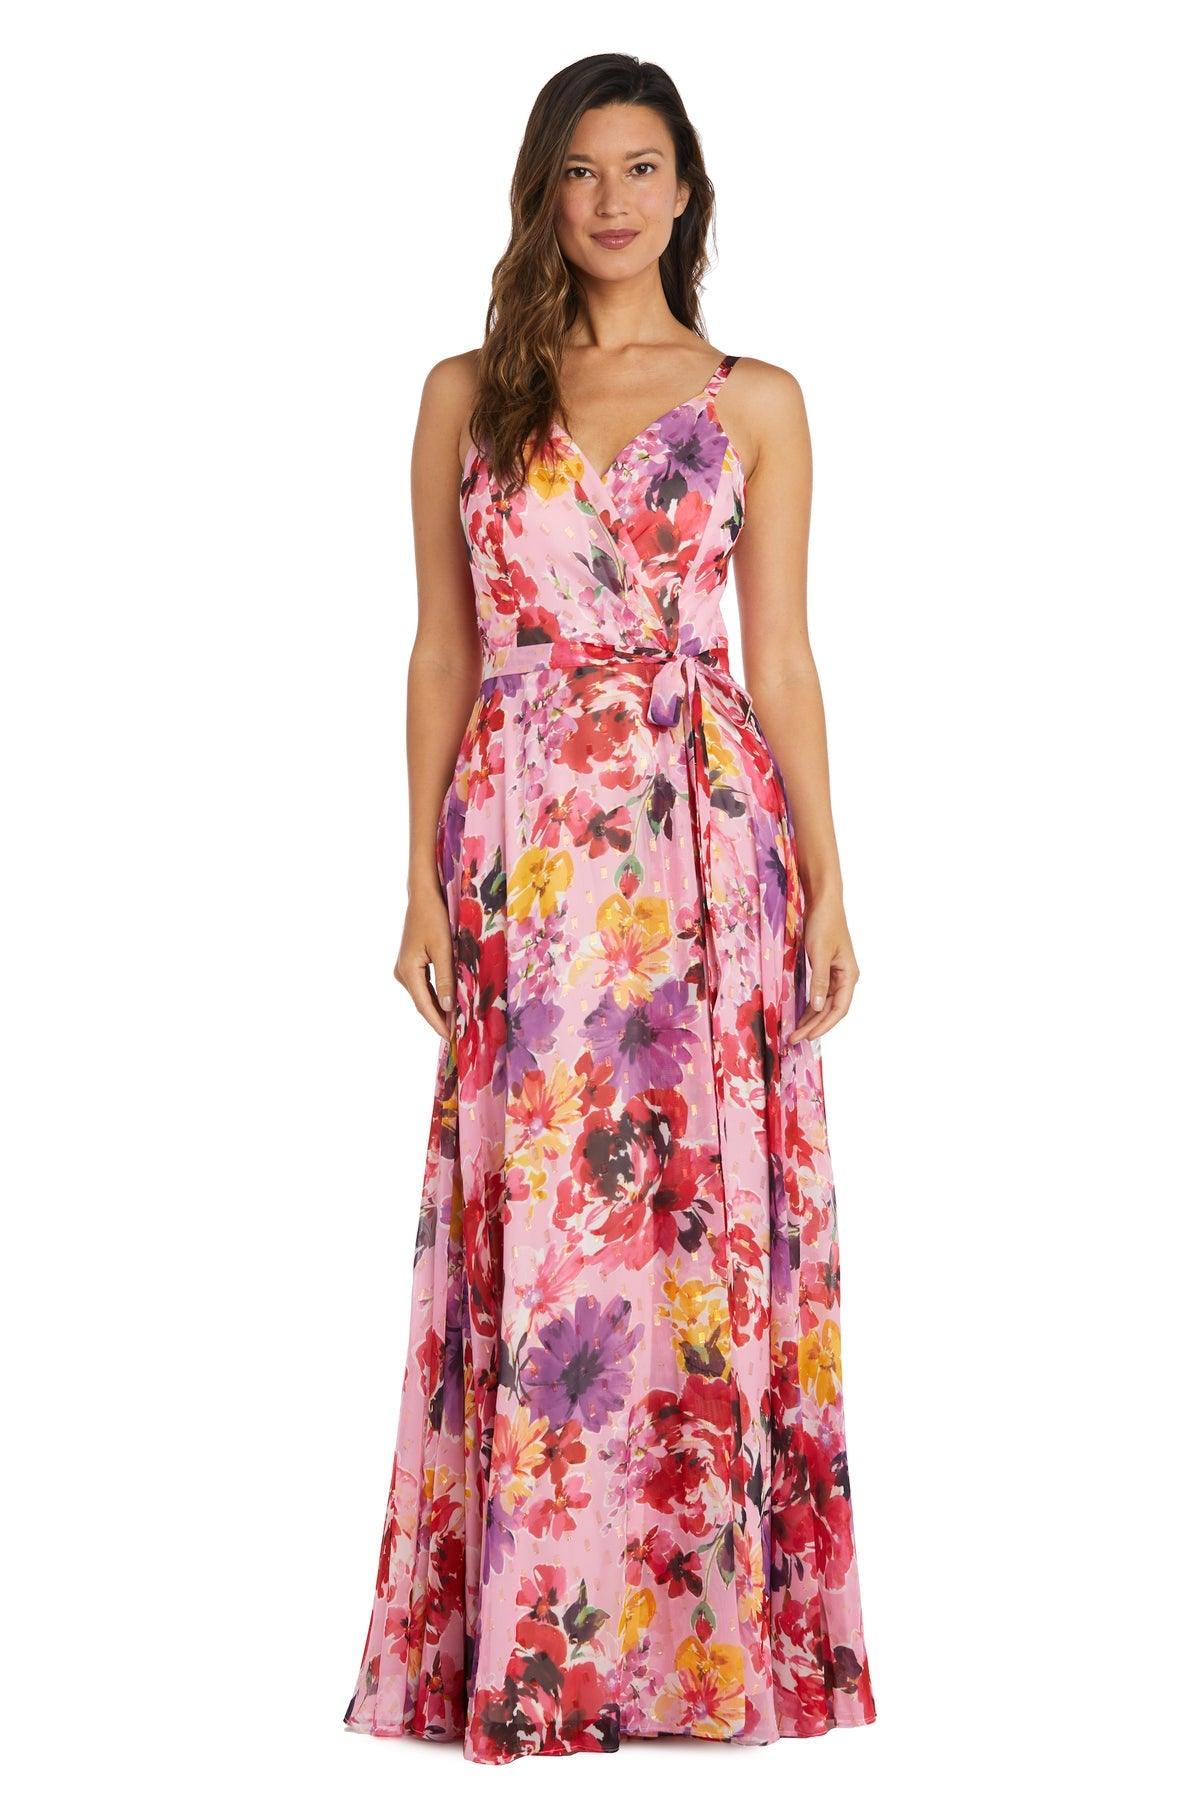 Nightway Long Formal Floral Print Dress 22164 | The Dress Outlet